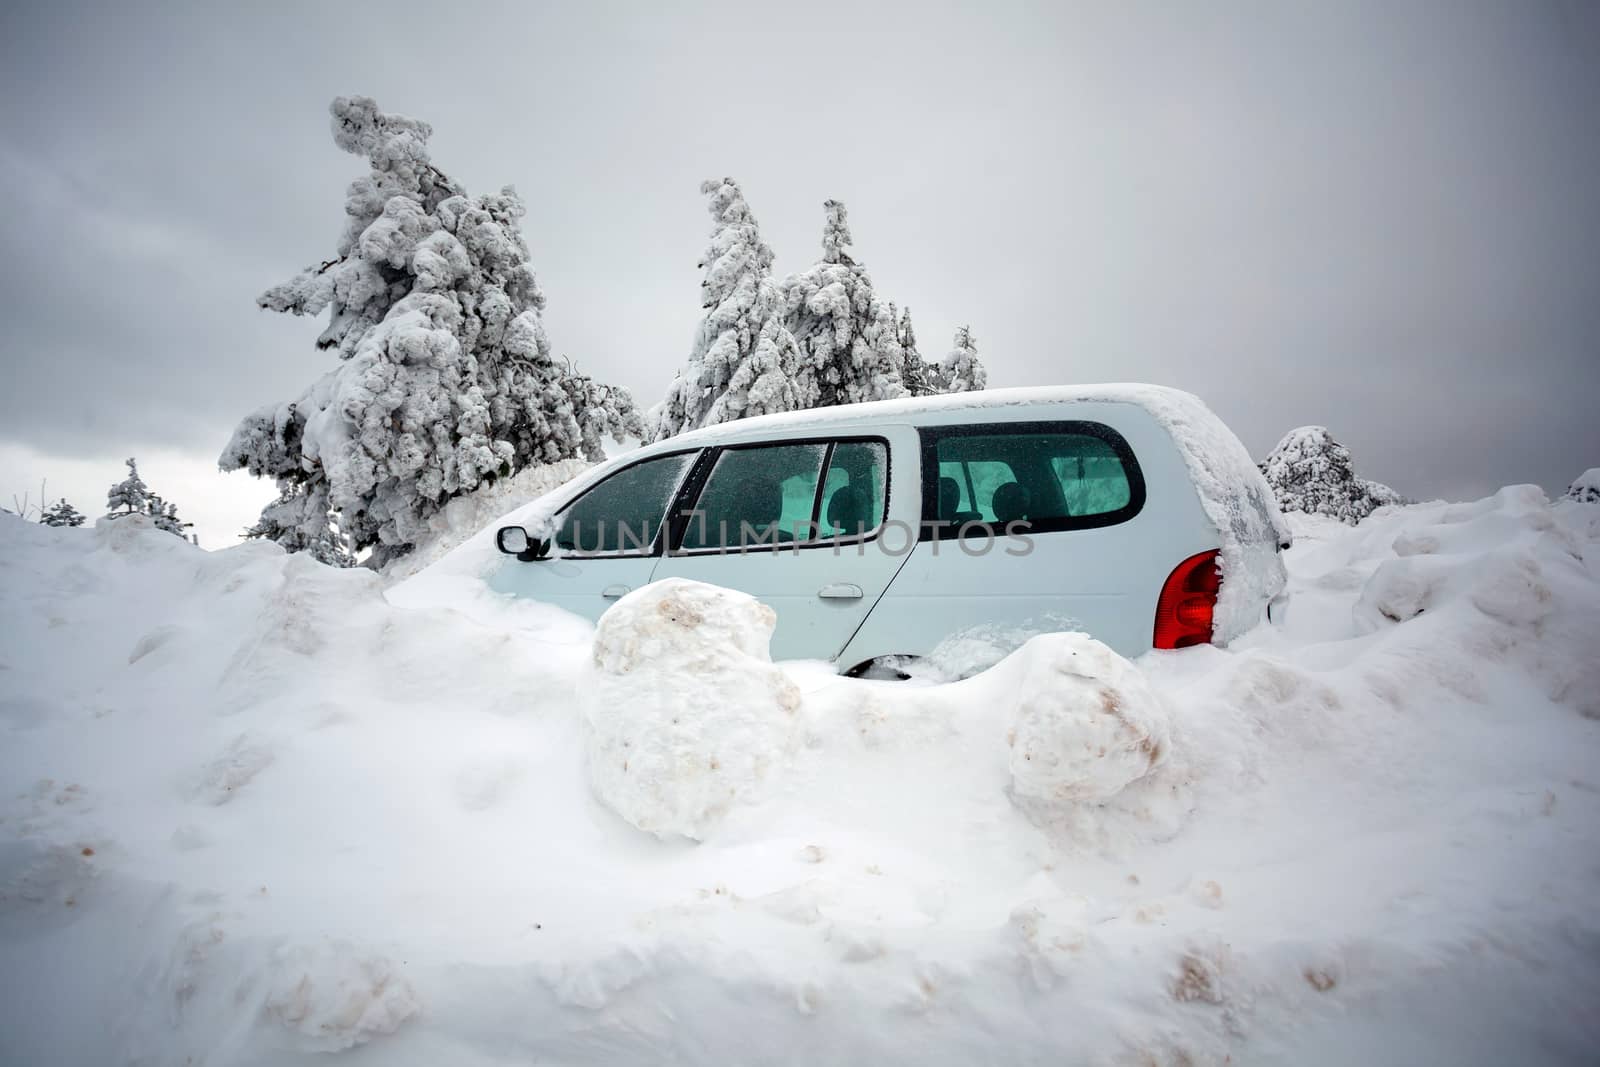 Car stuck in deep snow on mountain road - winter traffic problem stock image